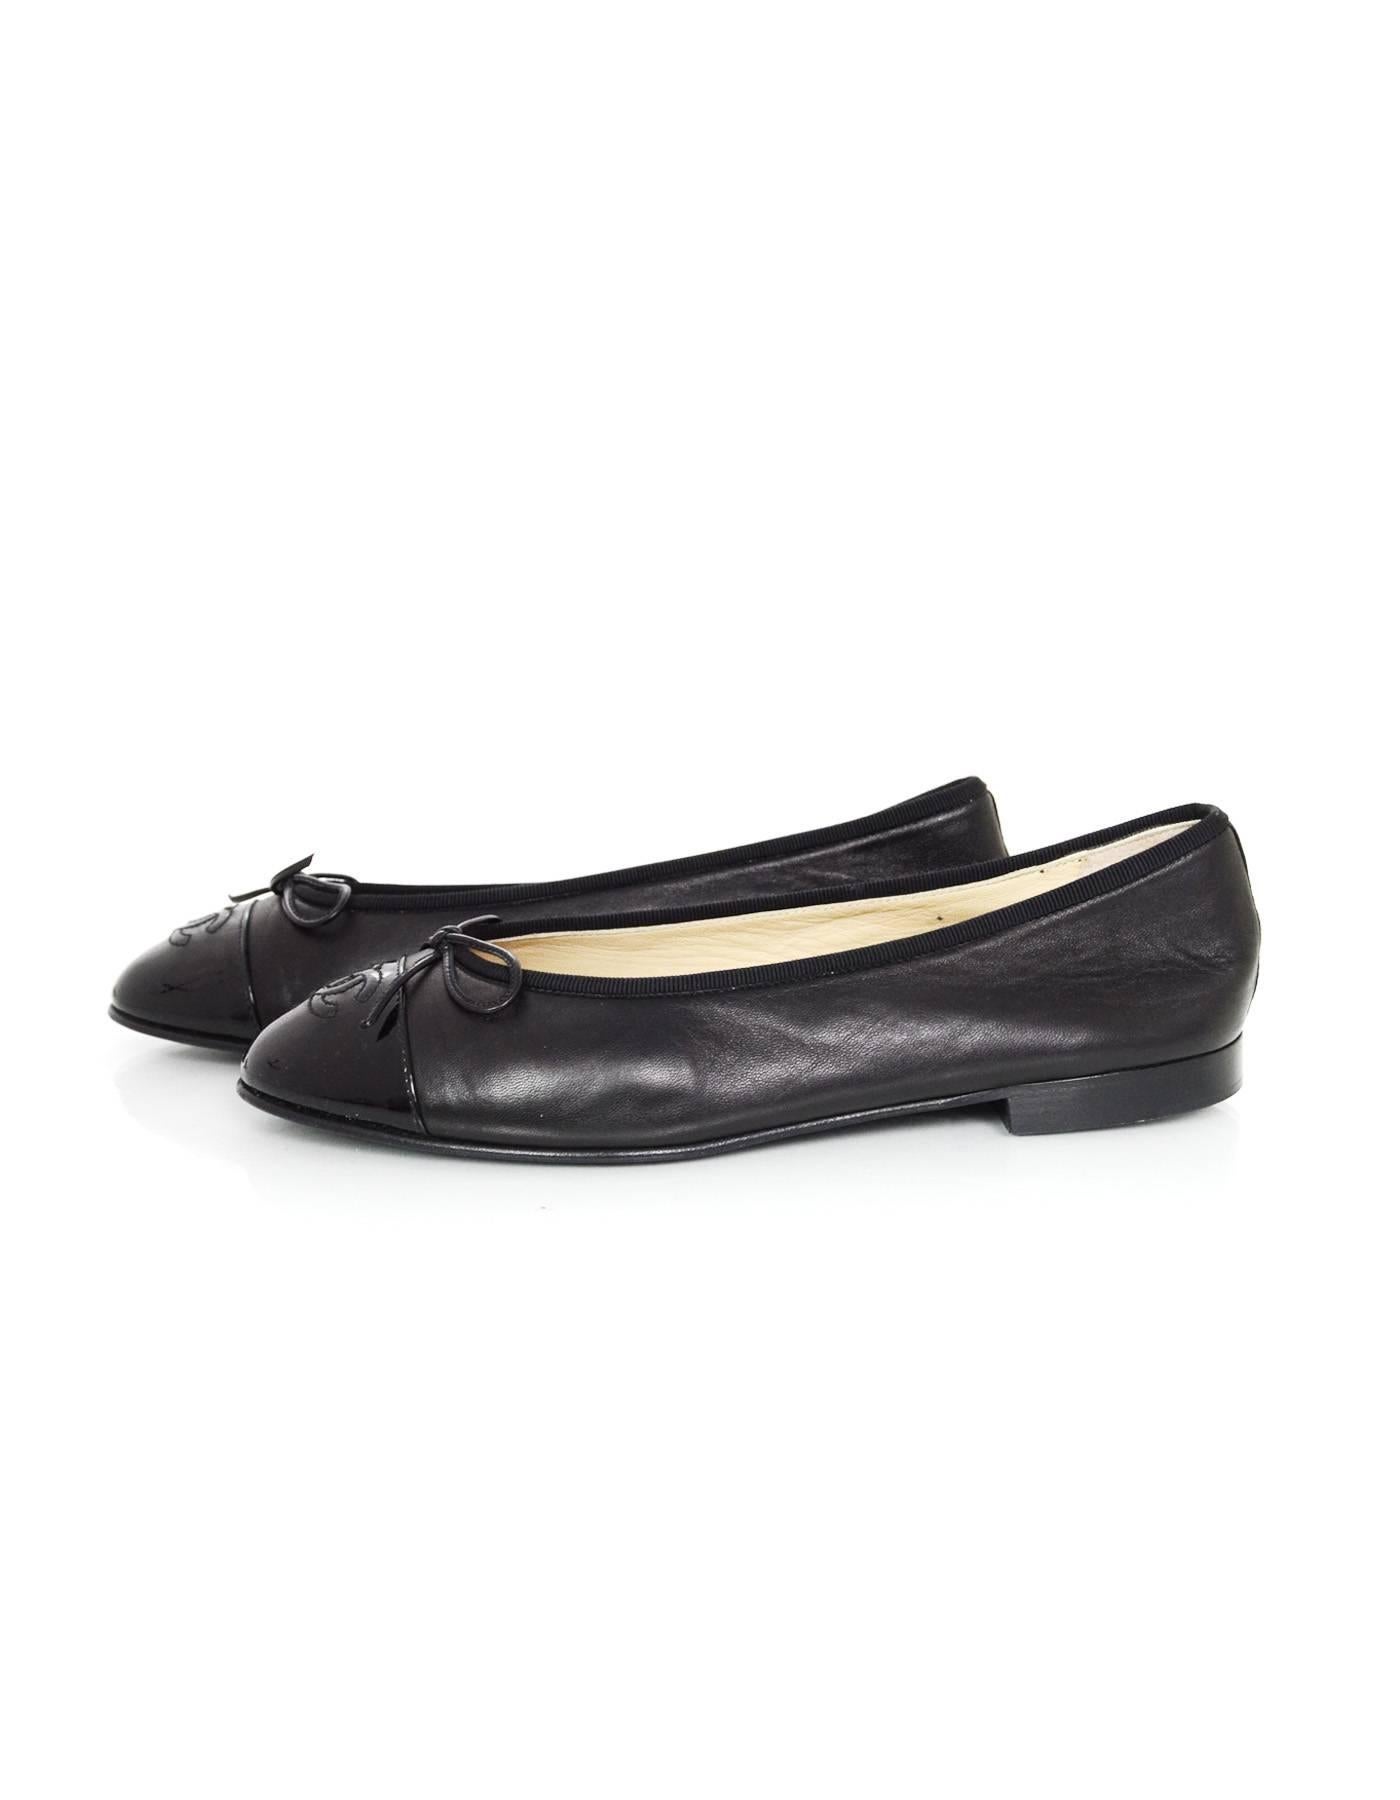 Chanel Black Leather Ballet Flats 
Features patent leather toe cap with CC stitched on top

Made In: Italy
Color: Black
Materials: Leather and patent leather
Closure/Opening: Slide on
Sole Stamp: CC Made in Italy 39 1/2
Overall Condition: Excellent